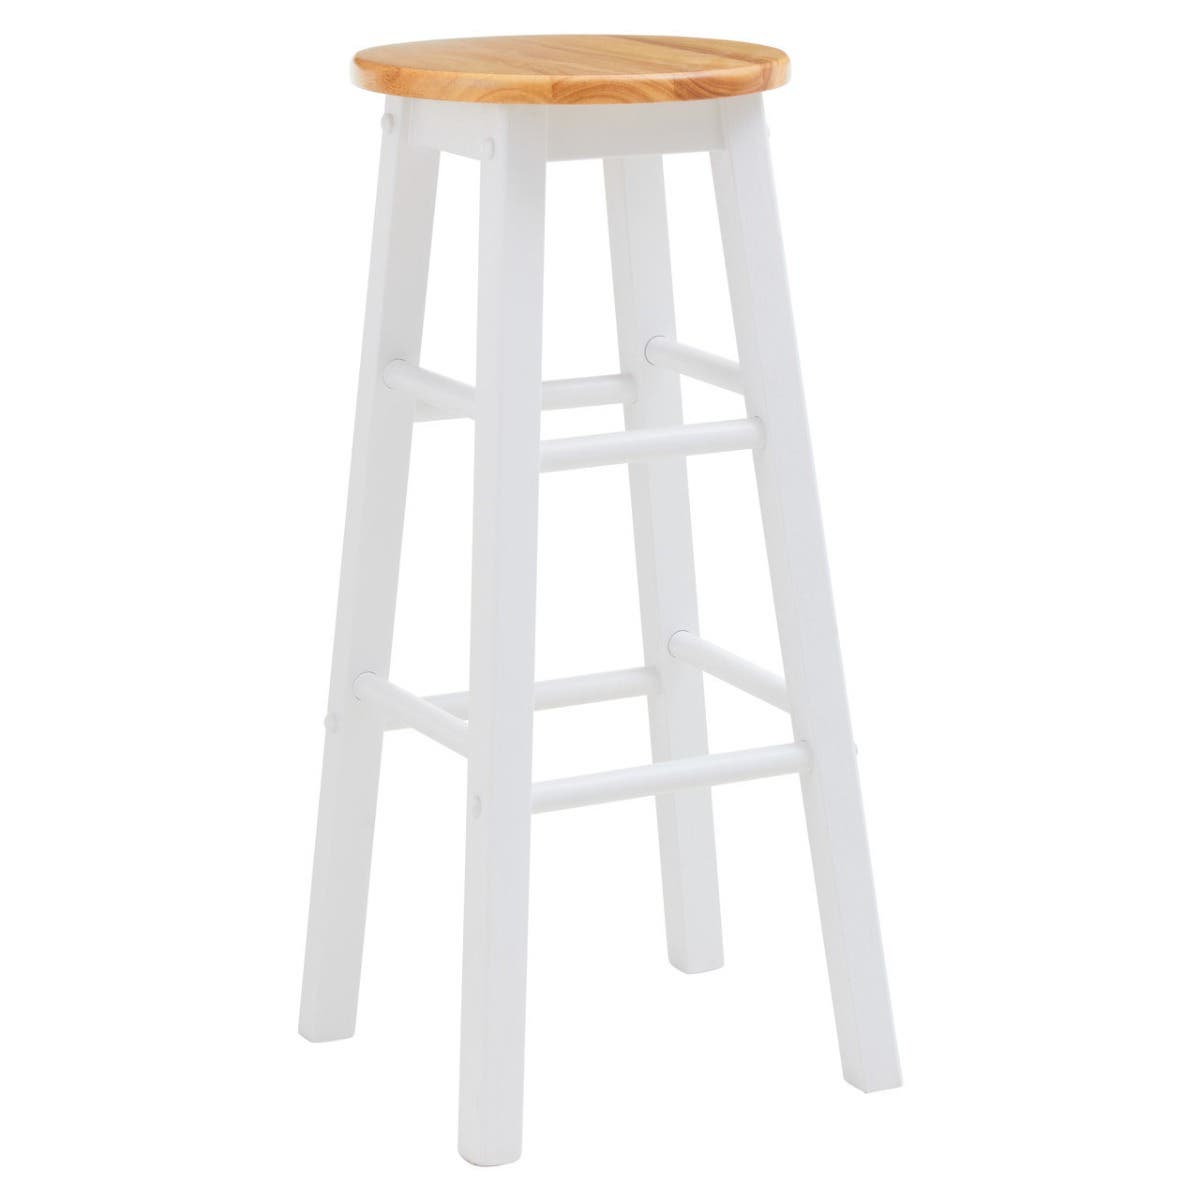 Chester Wood White and natural kitchen/bar Stool